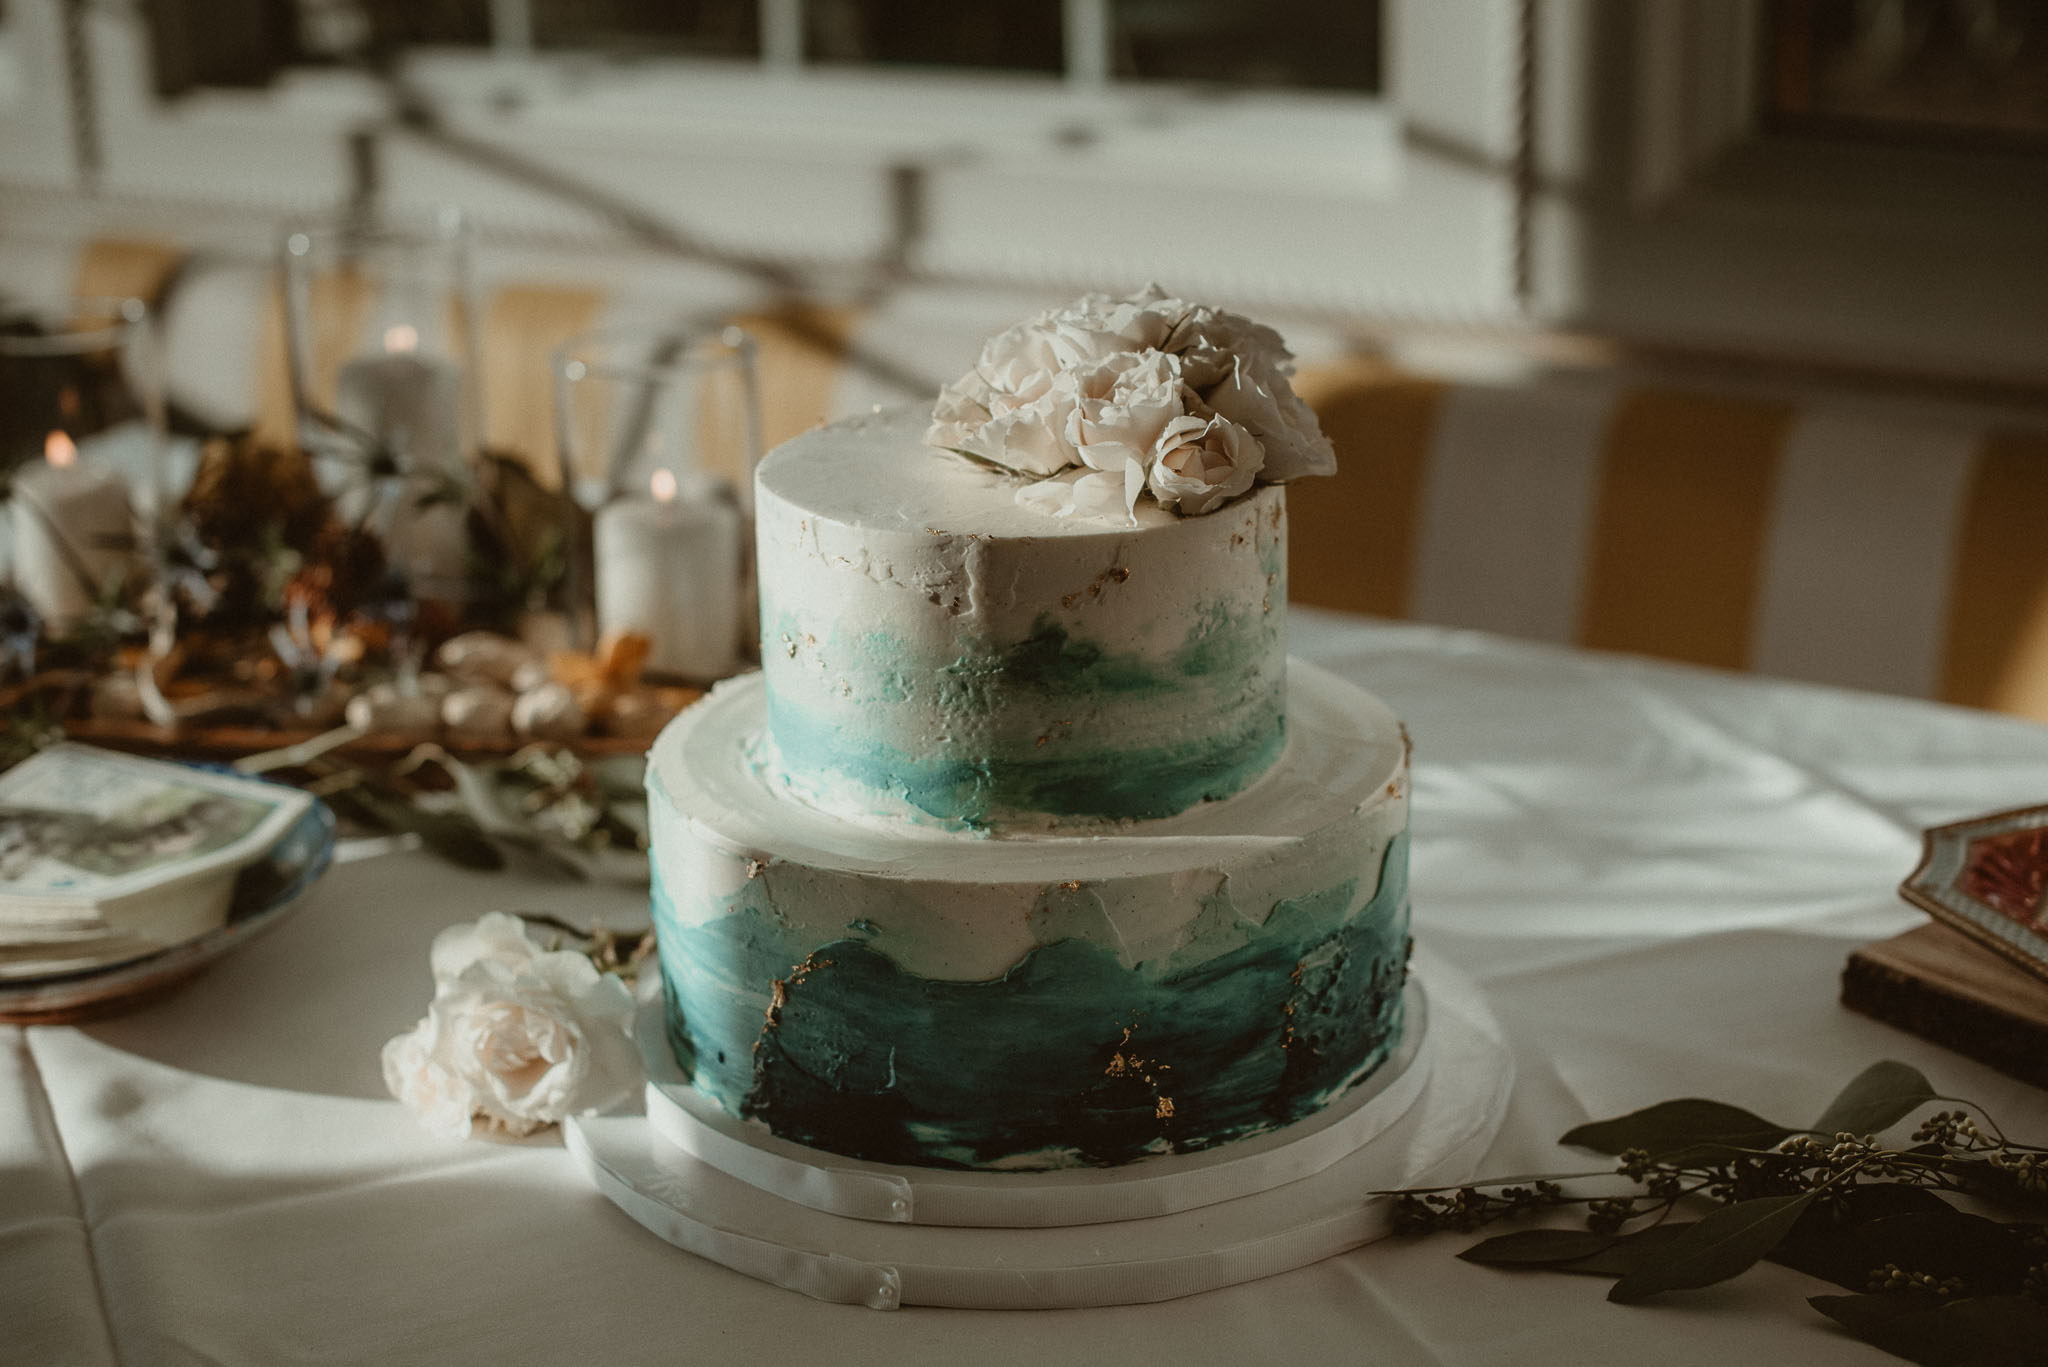 Small two tier wedding cake with fading Marine blue and flowers on top.